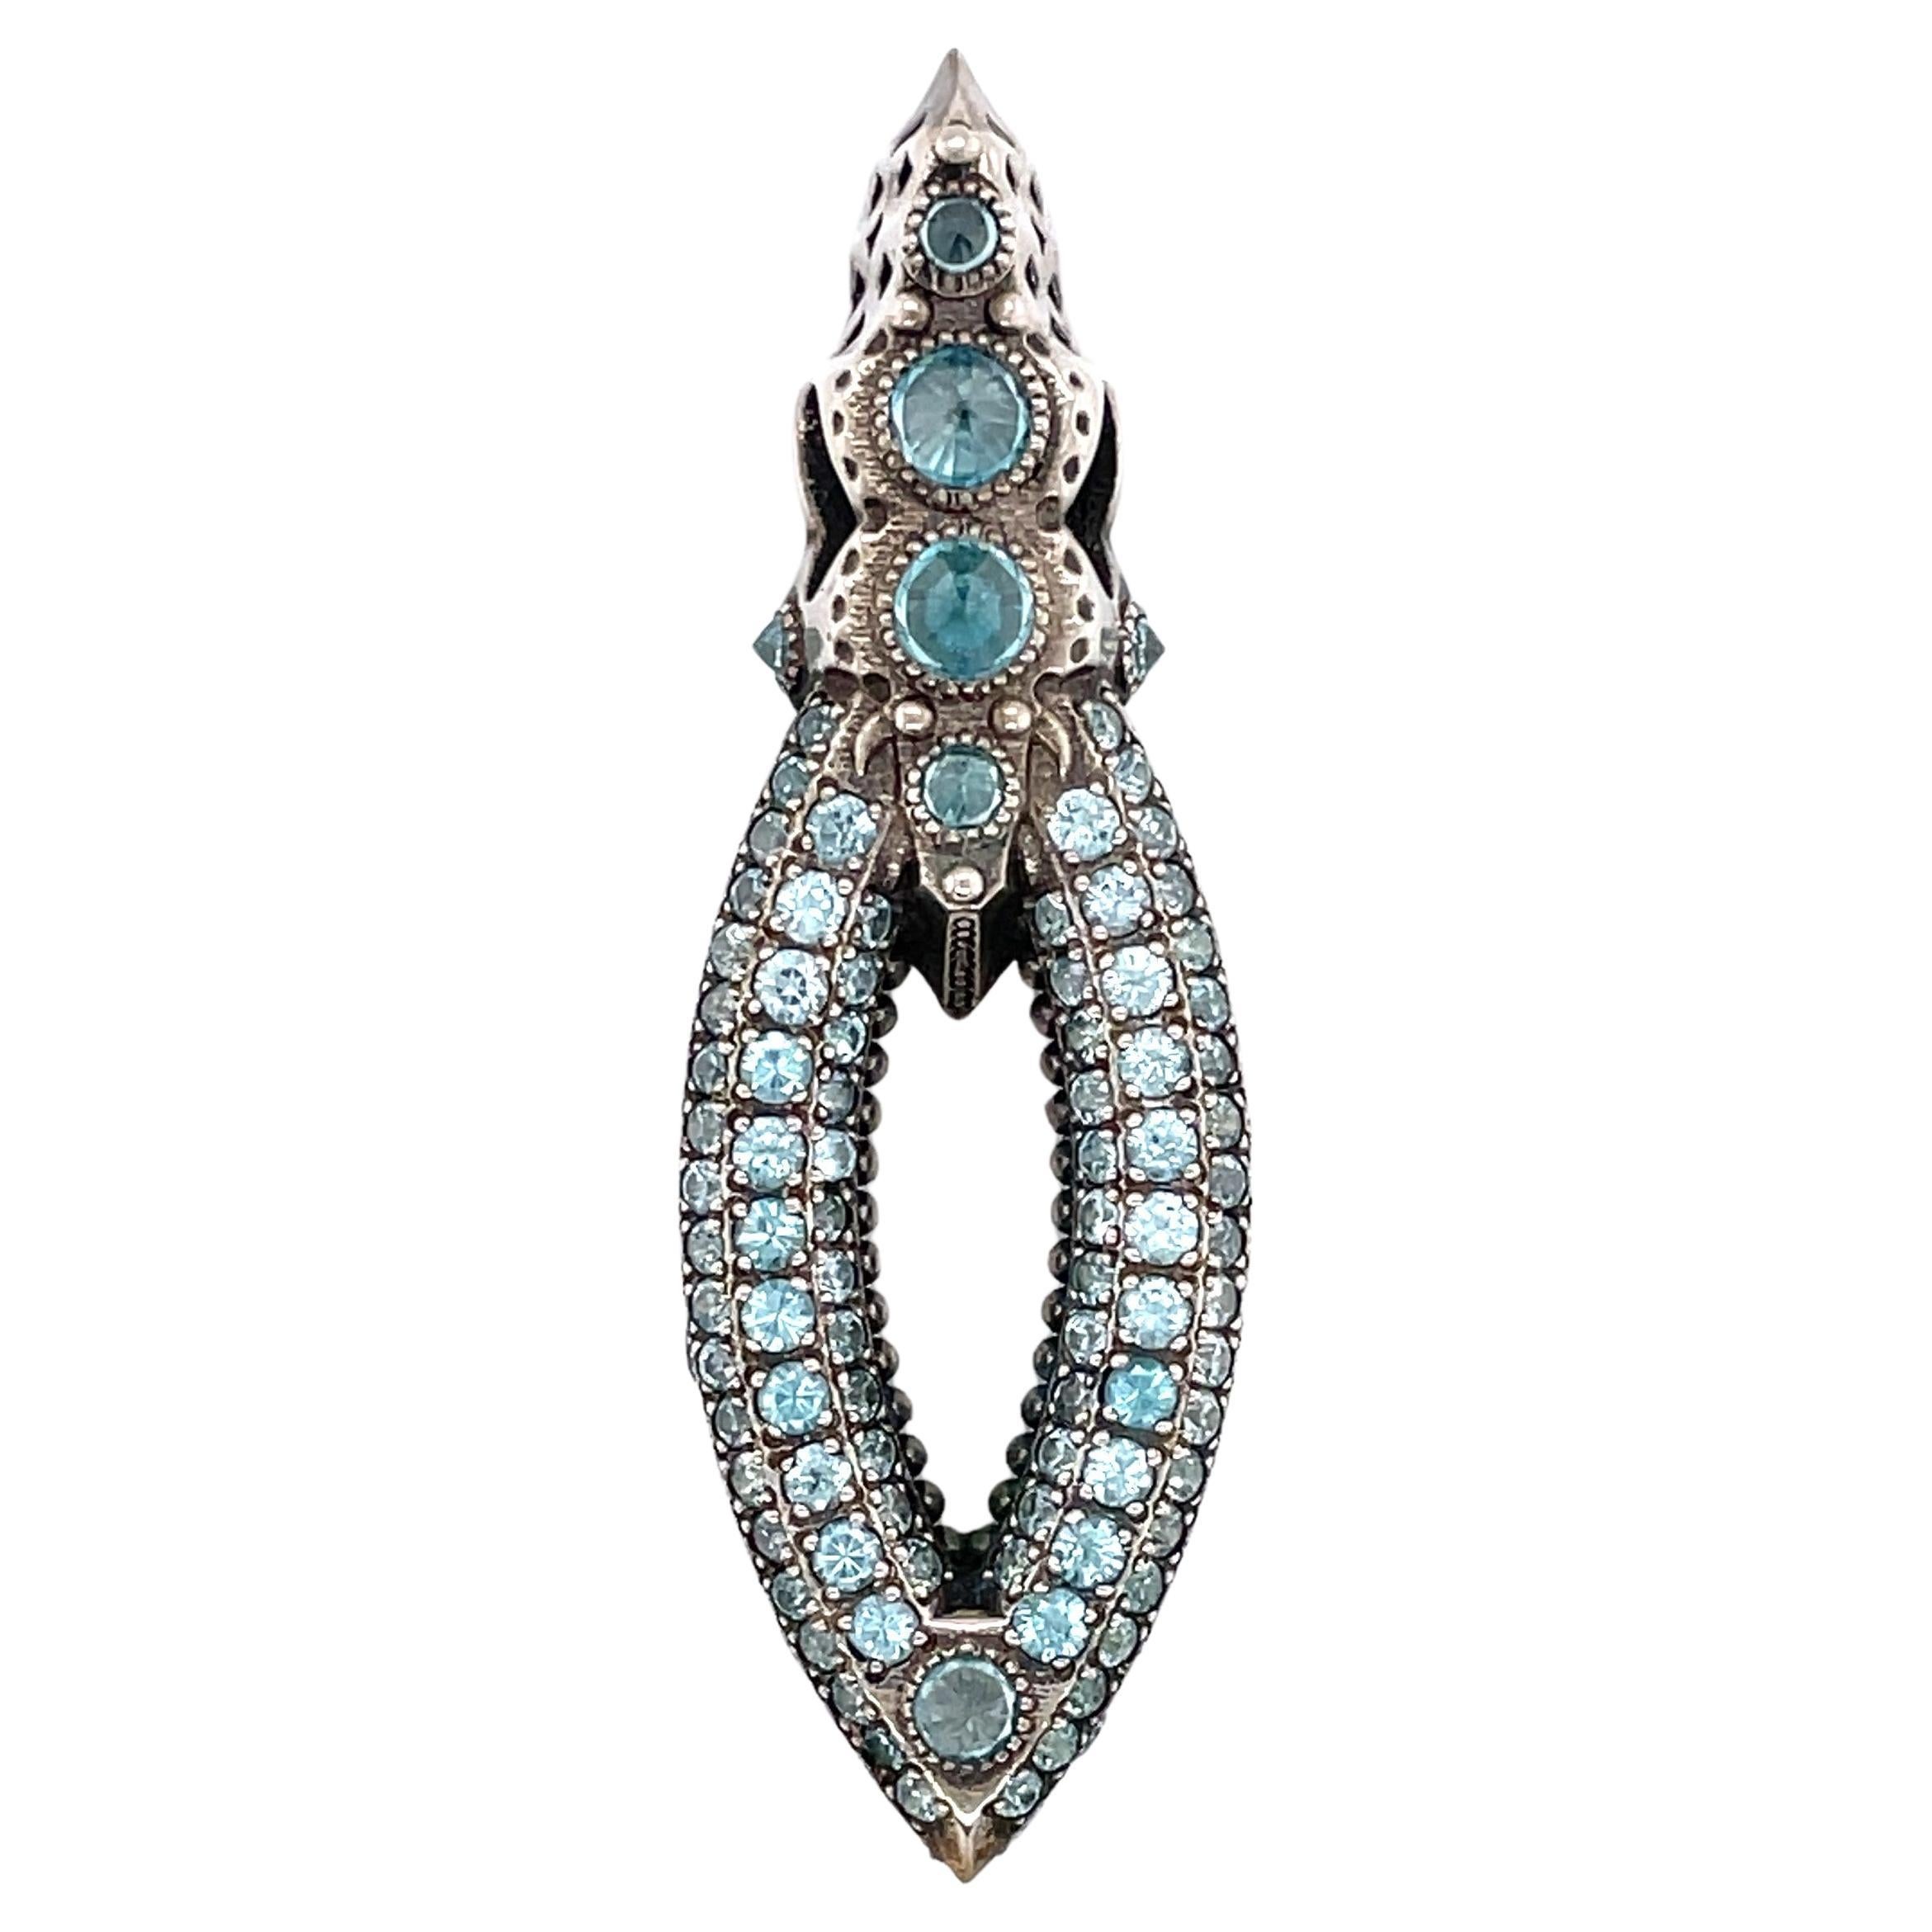 Vivid sky blue facet cut topaz gemstones glisten on this majestic sterling silver marquise shaped pendant expertly hand fabricated by jewelry designer and artisan Ben Harju. From the B. Harju Flotus Collection, Ben's self described focus on